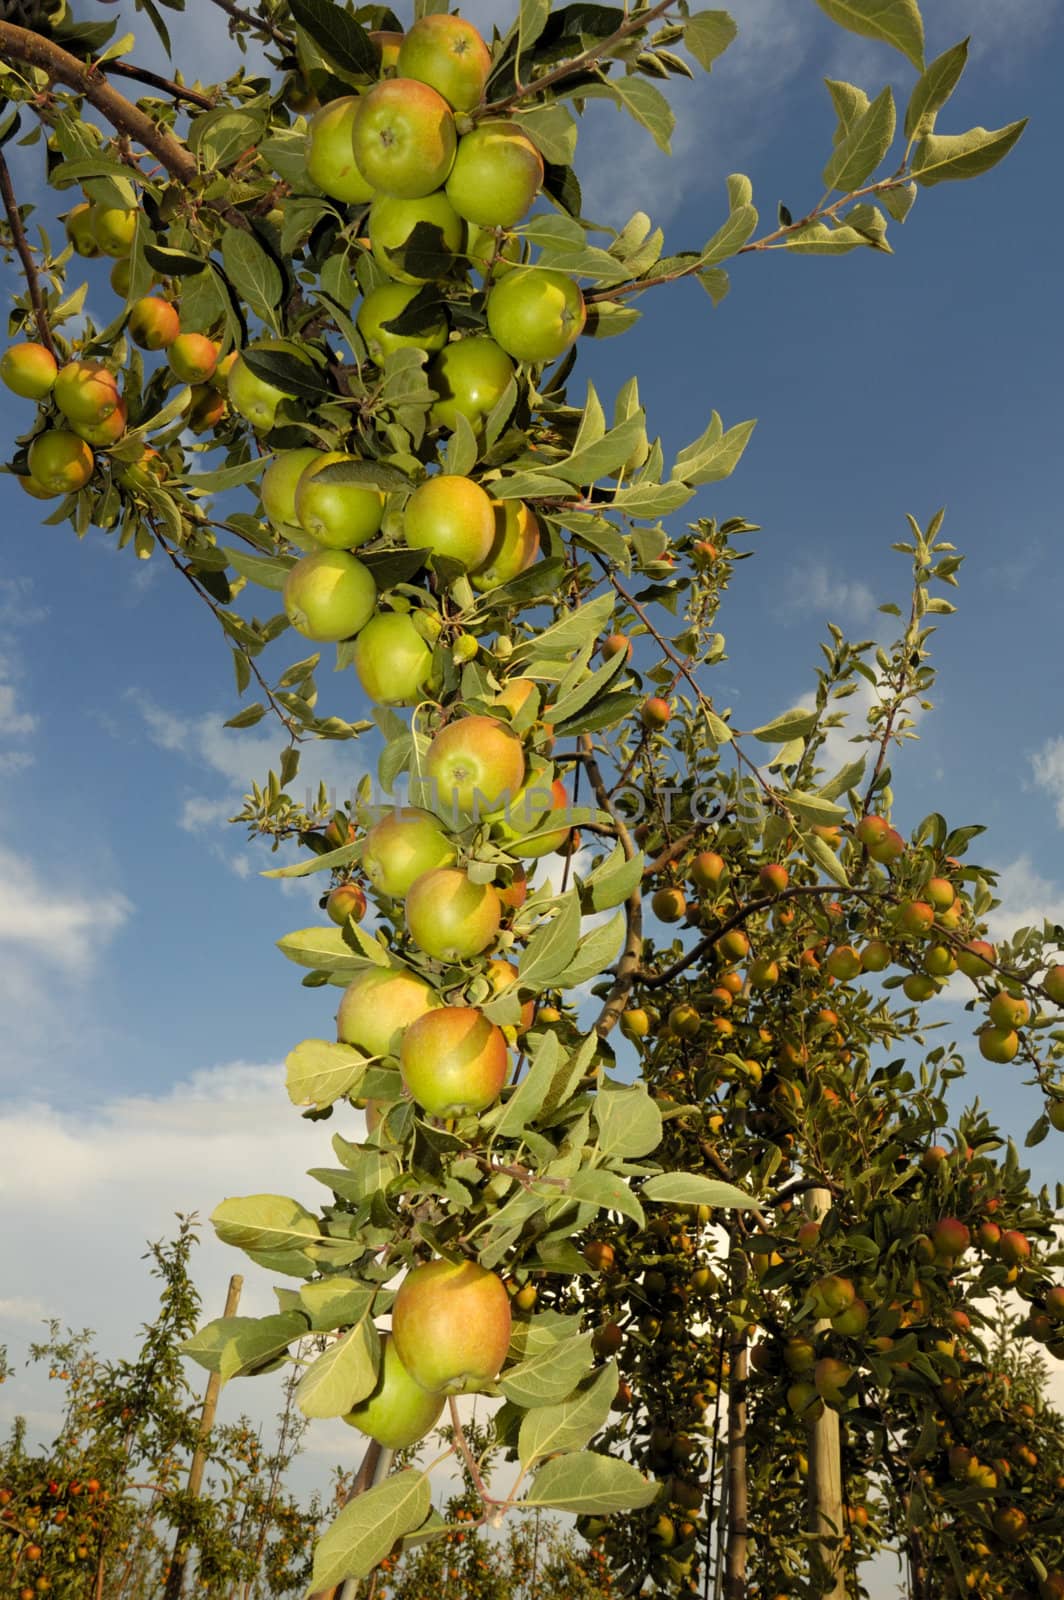 The boughs of an apple tree in late summer, weighed down with ripening fruit, set against a blue sky. More heavily-laden trees in the background.